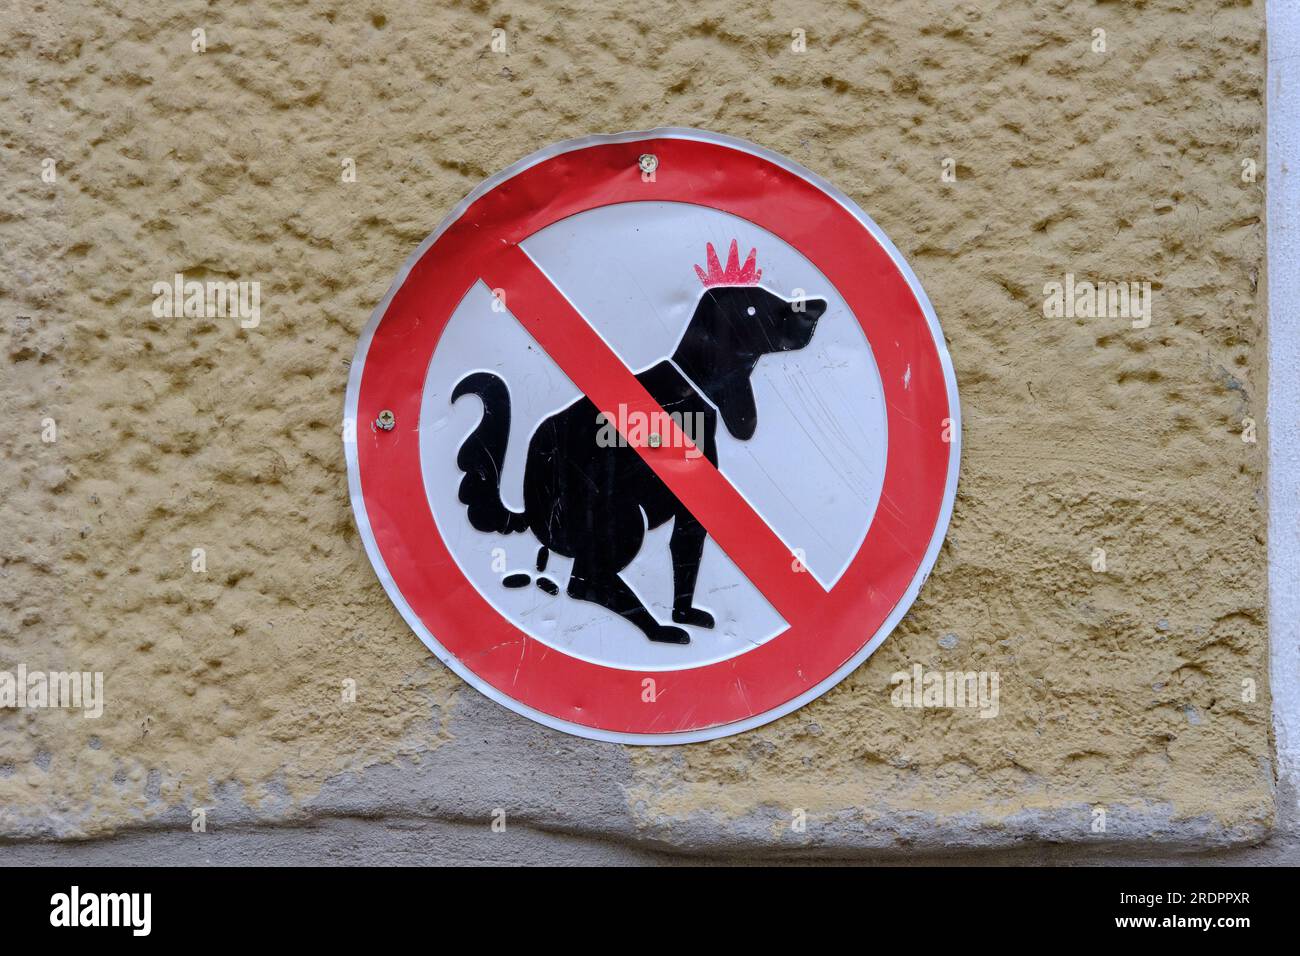 No dogs sign in the streets of Berlin ironically adorned with a mohawk punk outfit. Stock Photo